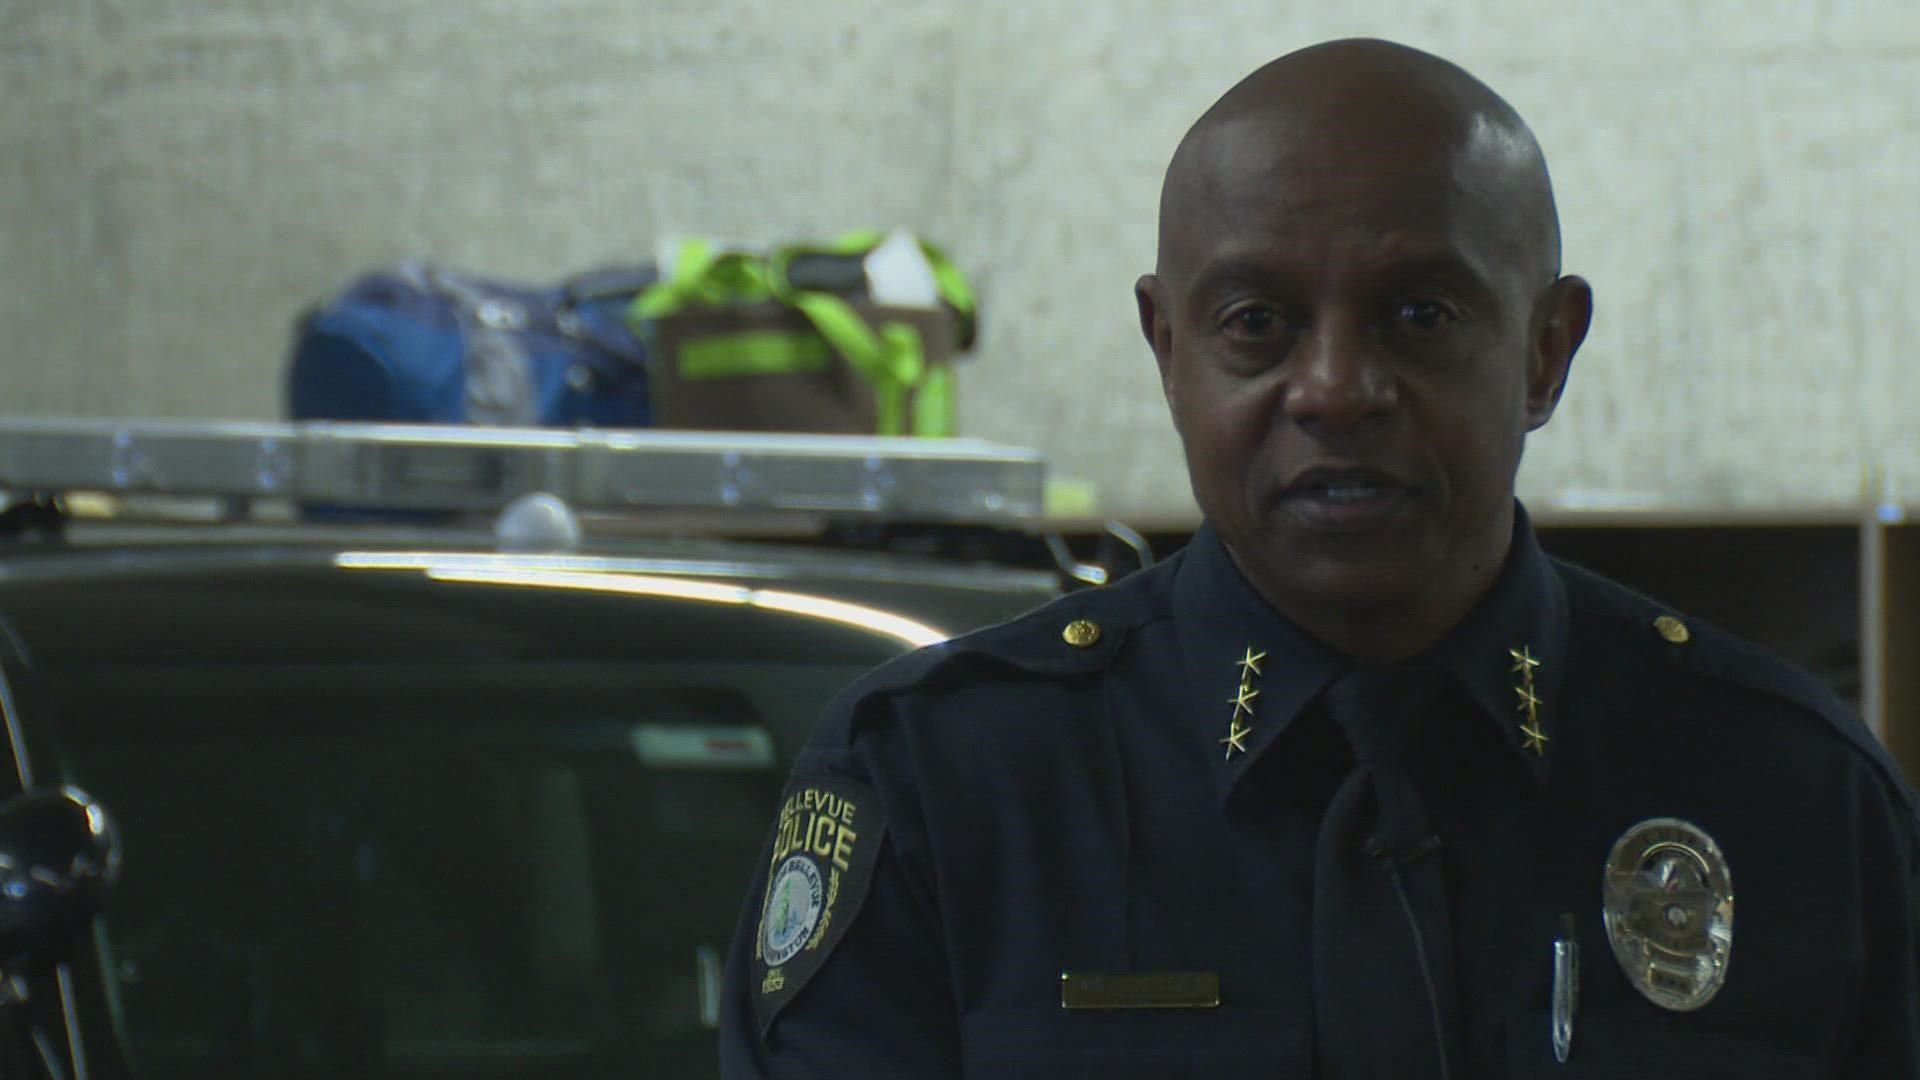 City Manager Brad Miyake announced Wednesday the city named Interim Police Chief Wendell Shirley to serve as the next chief of the Bellevue Police Department.